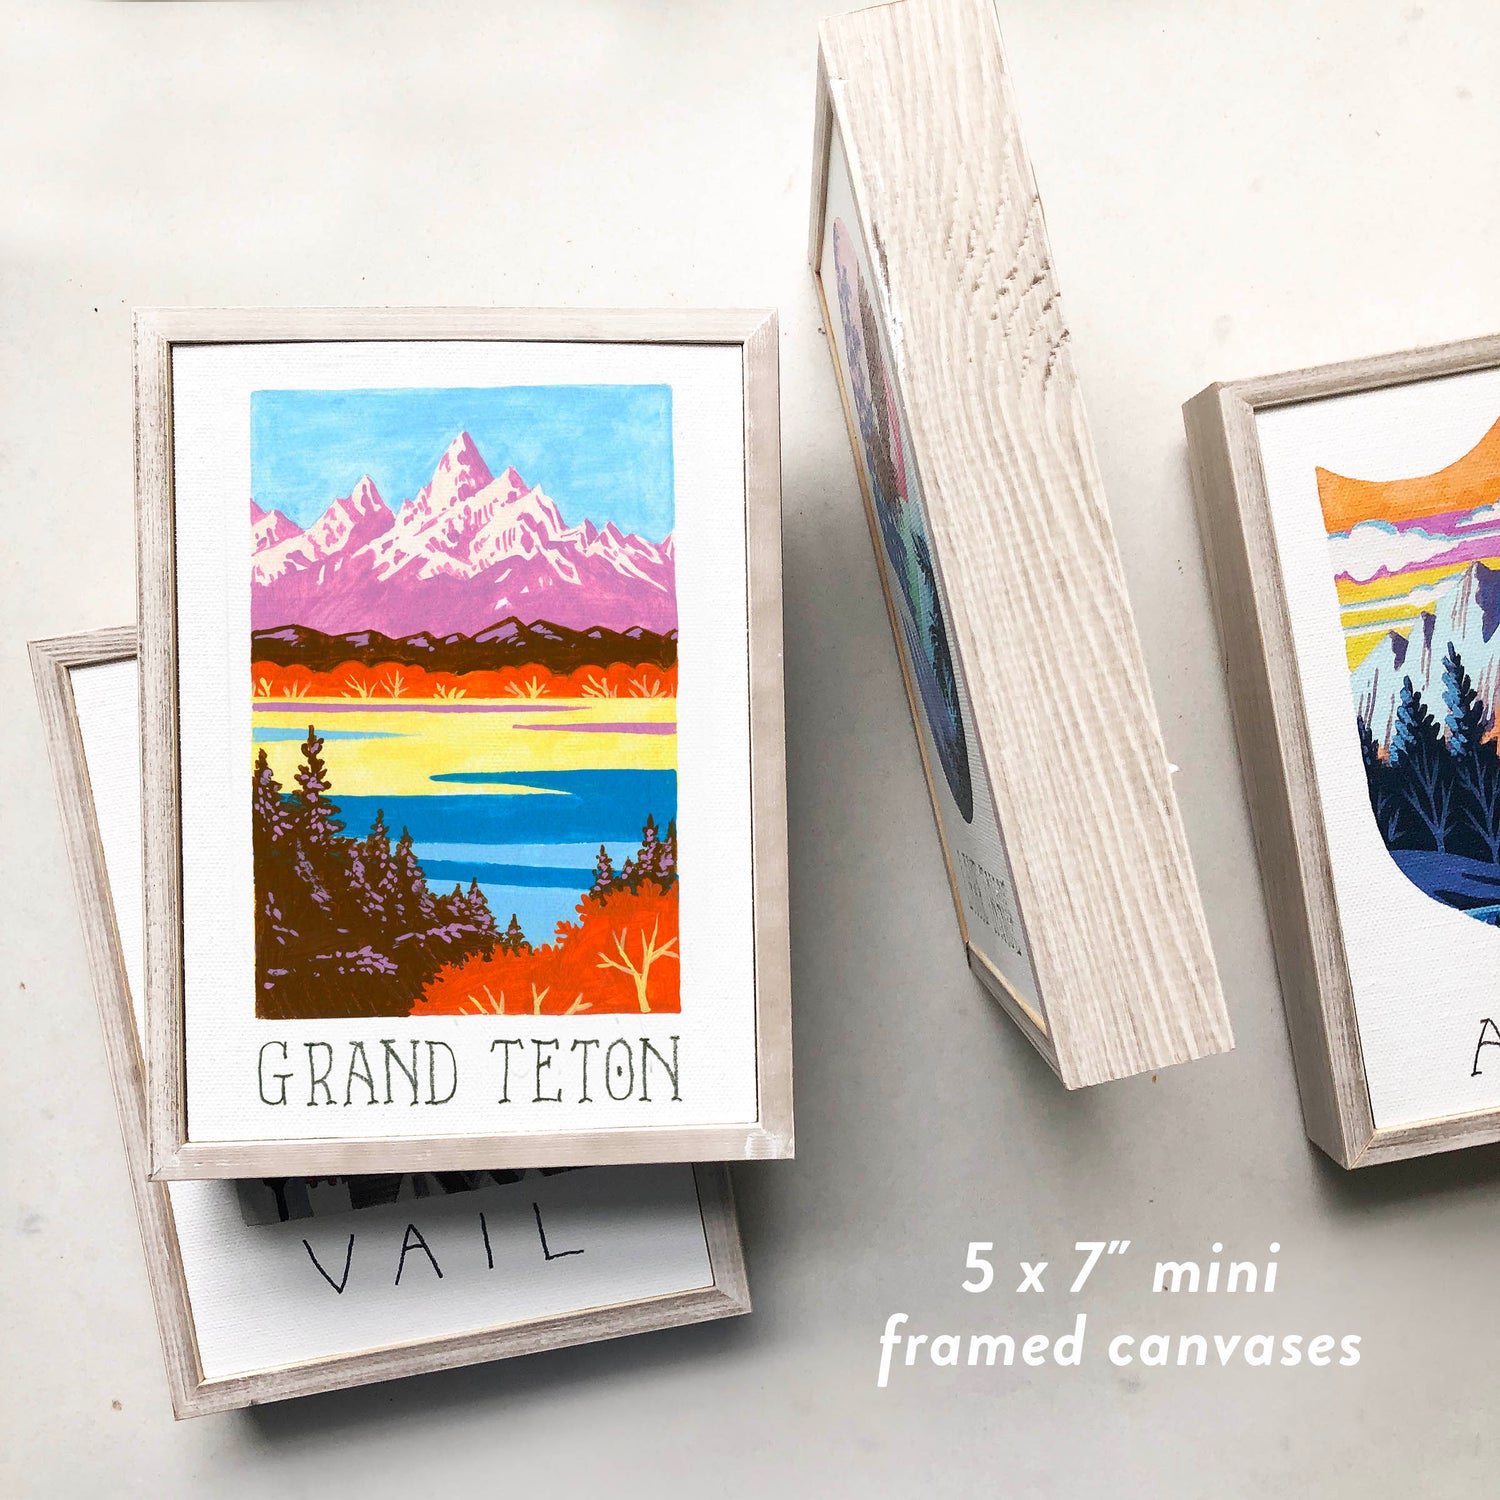 Grand Teton National Park framed art with mountains, Snake River, trees, and trails; trendy illustration by Angela Staehling